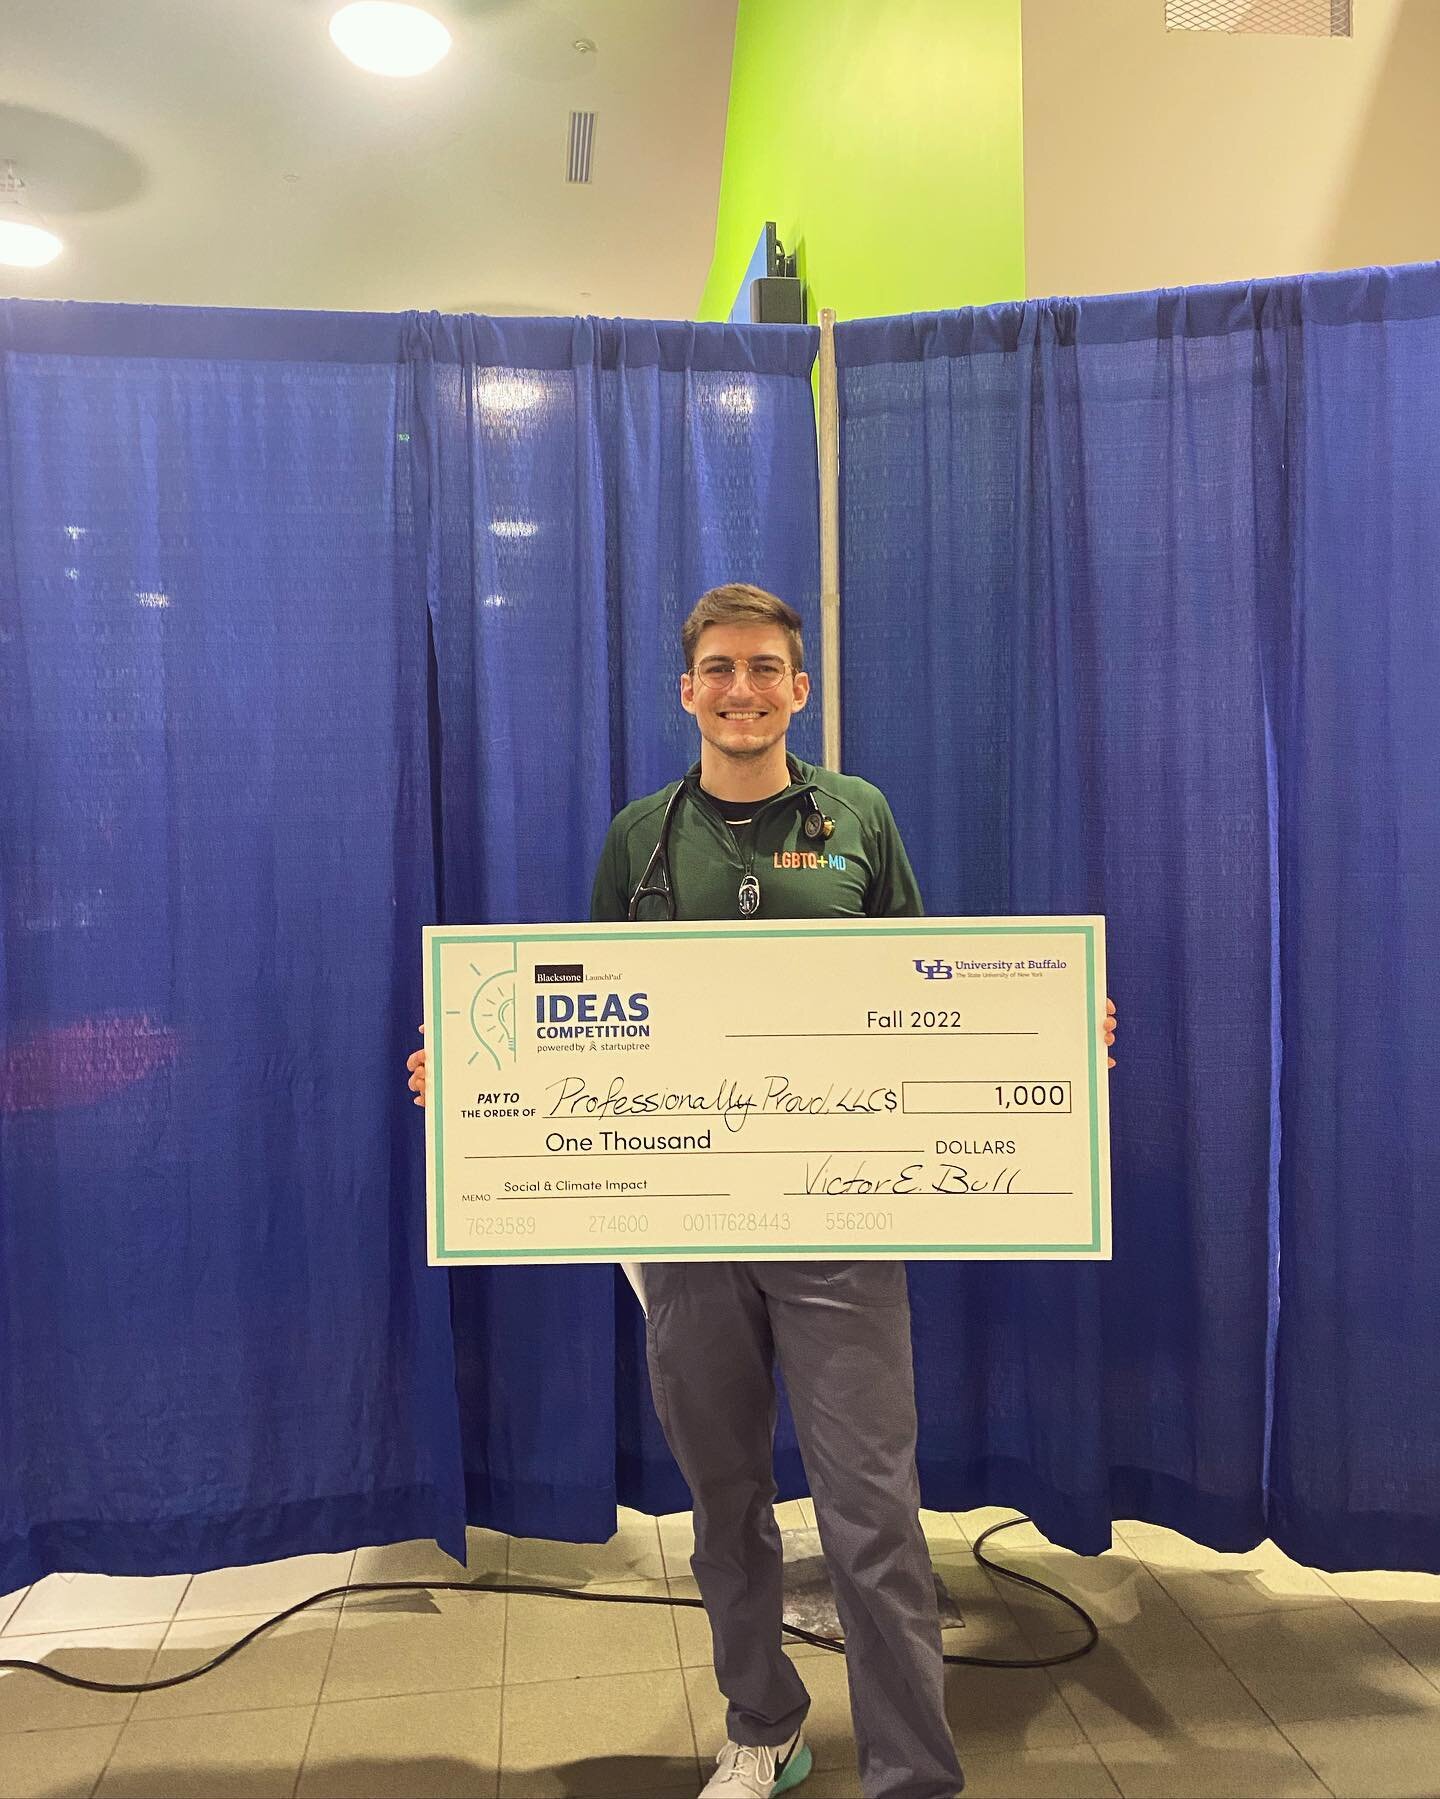 So #ProfessionallyProud to announce our company was the winner of the UB IDEAS Social and Climate Impact Category! With this award, we advance to the National round to compete for a grand prize of $10,000! Thank you to all involved, especially @launc